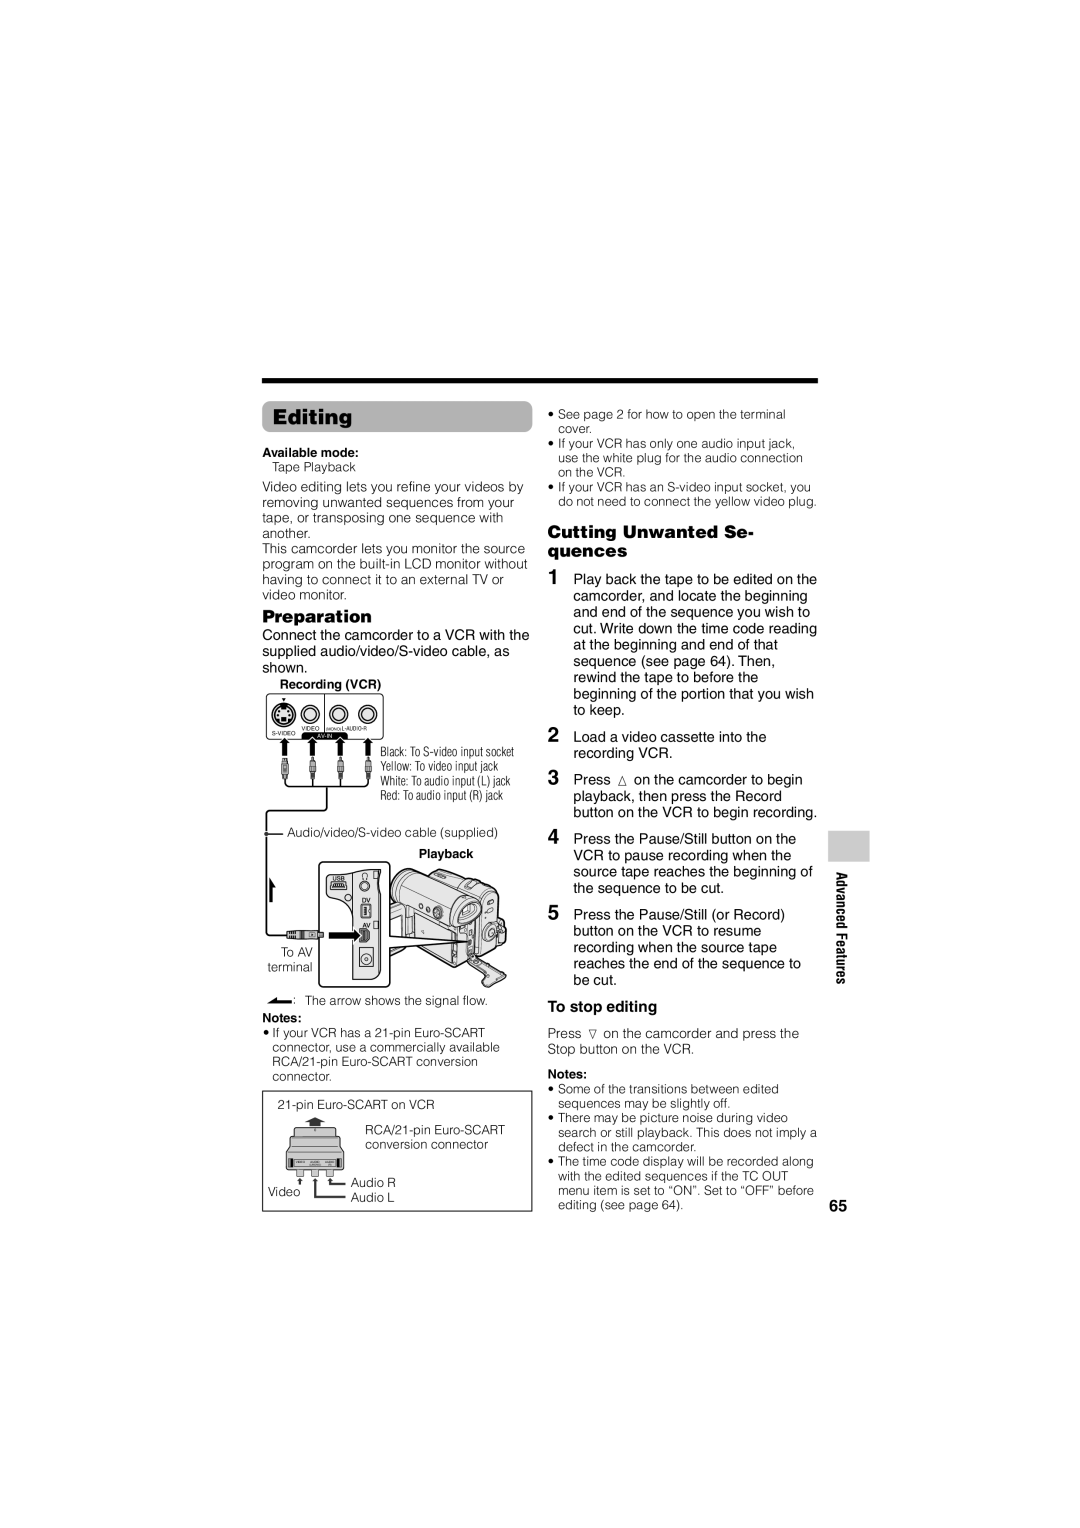 Sharp VL-Z400H-T operation manual Editing, Cutting Unwanted Se- quences, Preparation, To stop editing, Advanced Features 